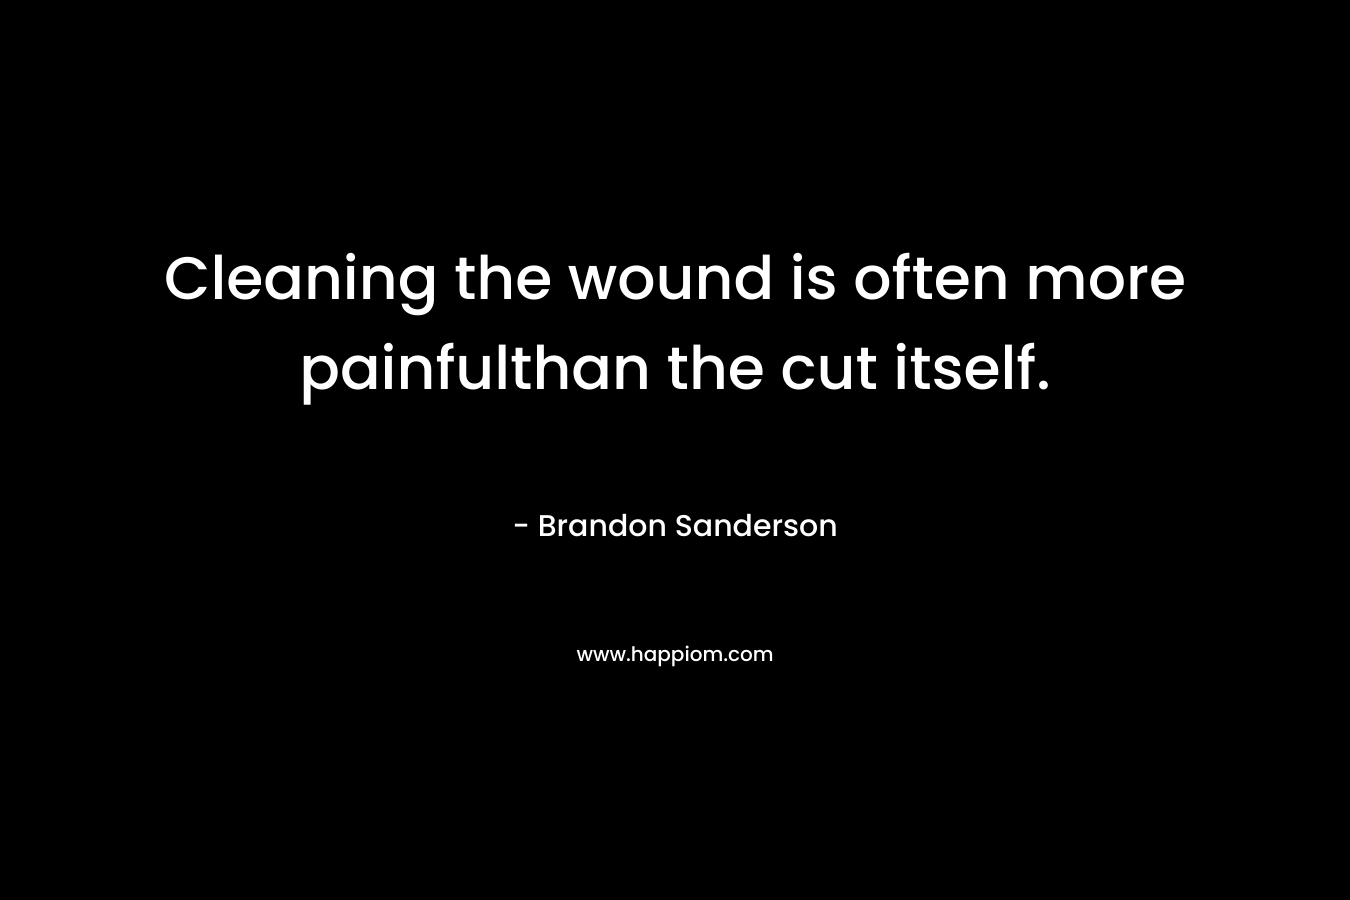 Cleaning the wound is often more painfulthan the cut itself. – Brandon Sanderson